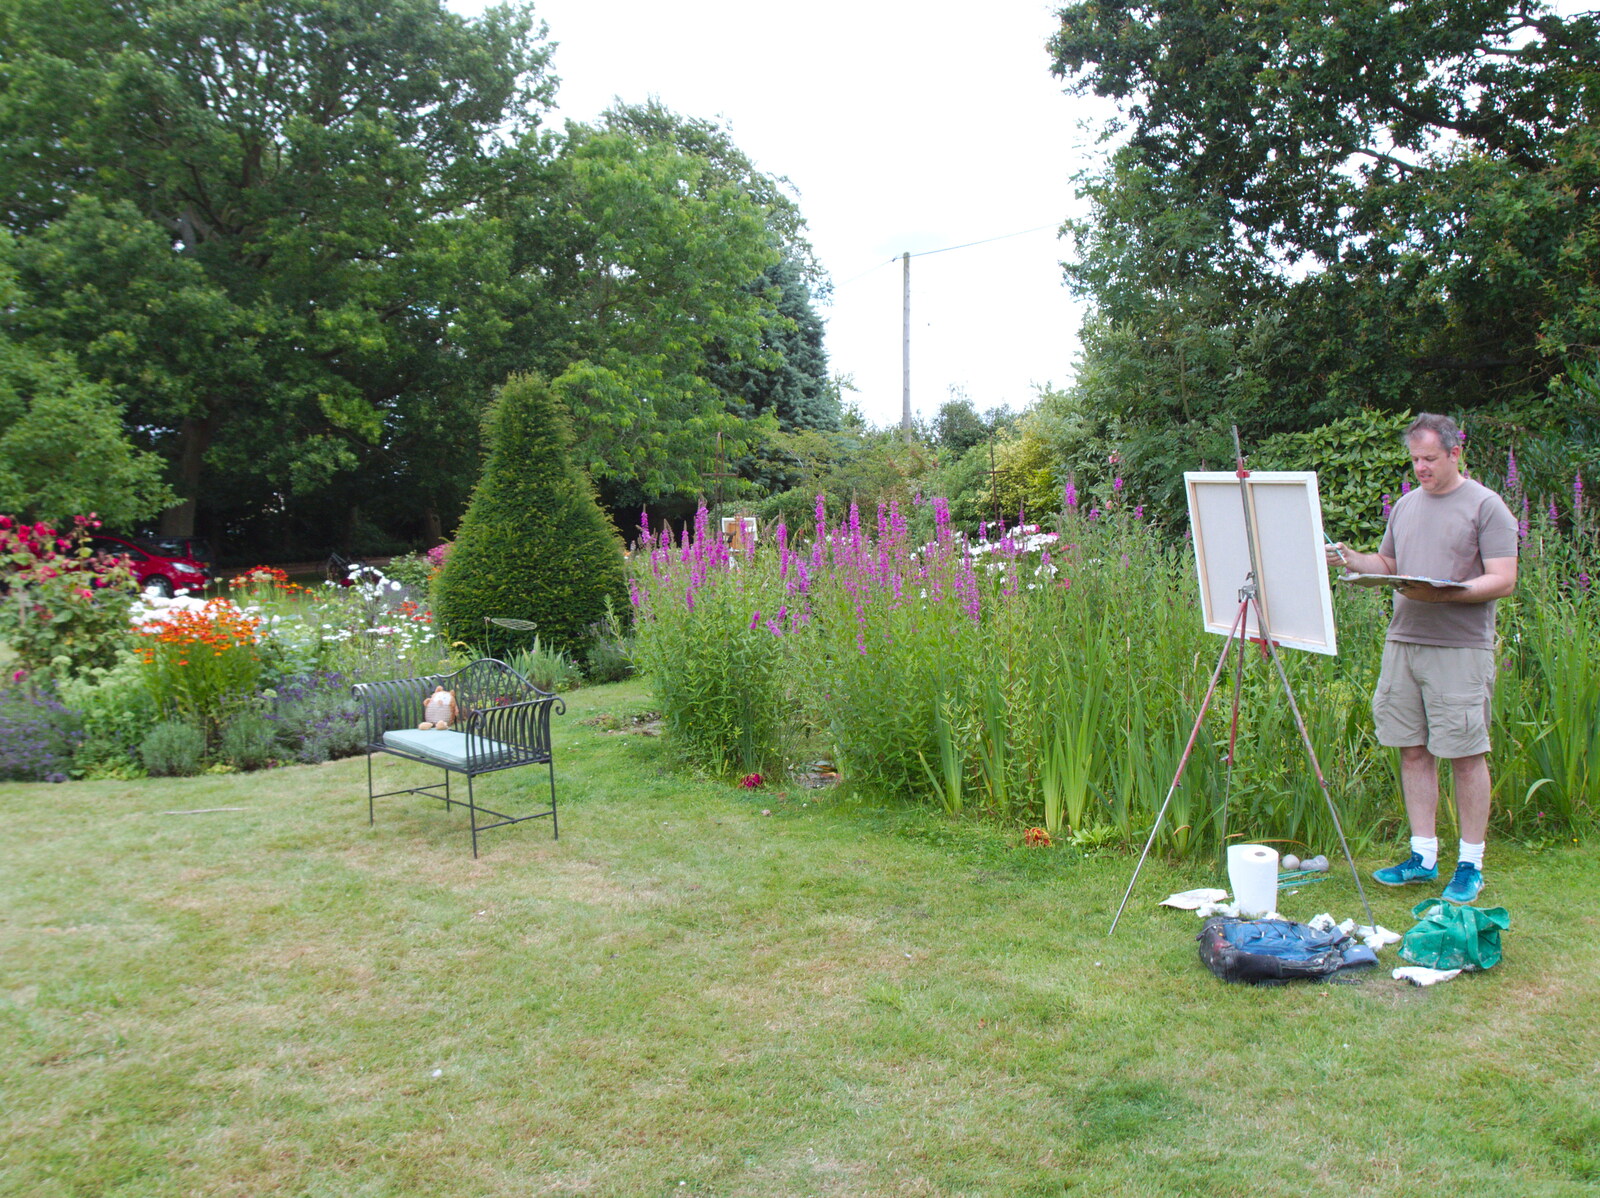 A spot of painting in the garden from GSB at the Summer Fete, Market Weston, Suffolk - 20th July 2019